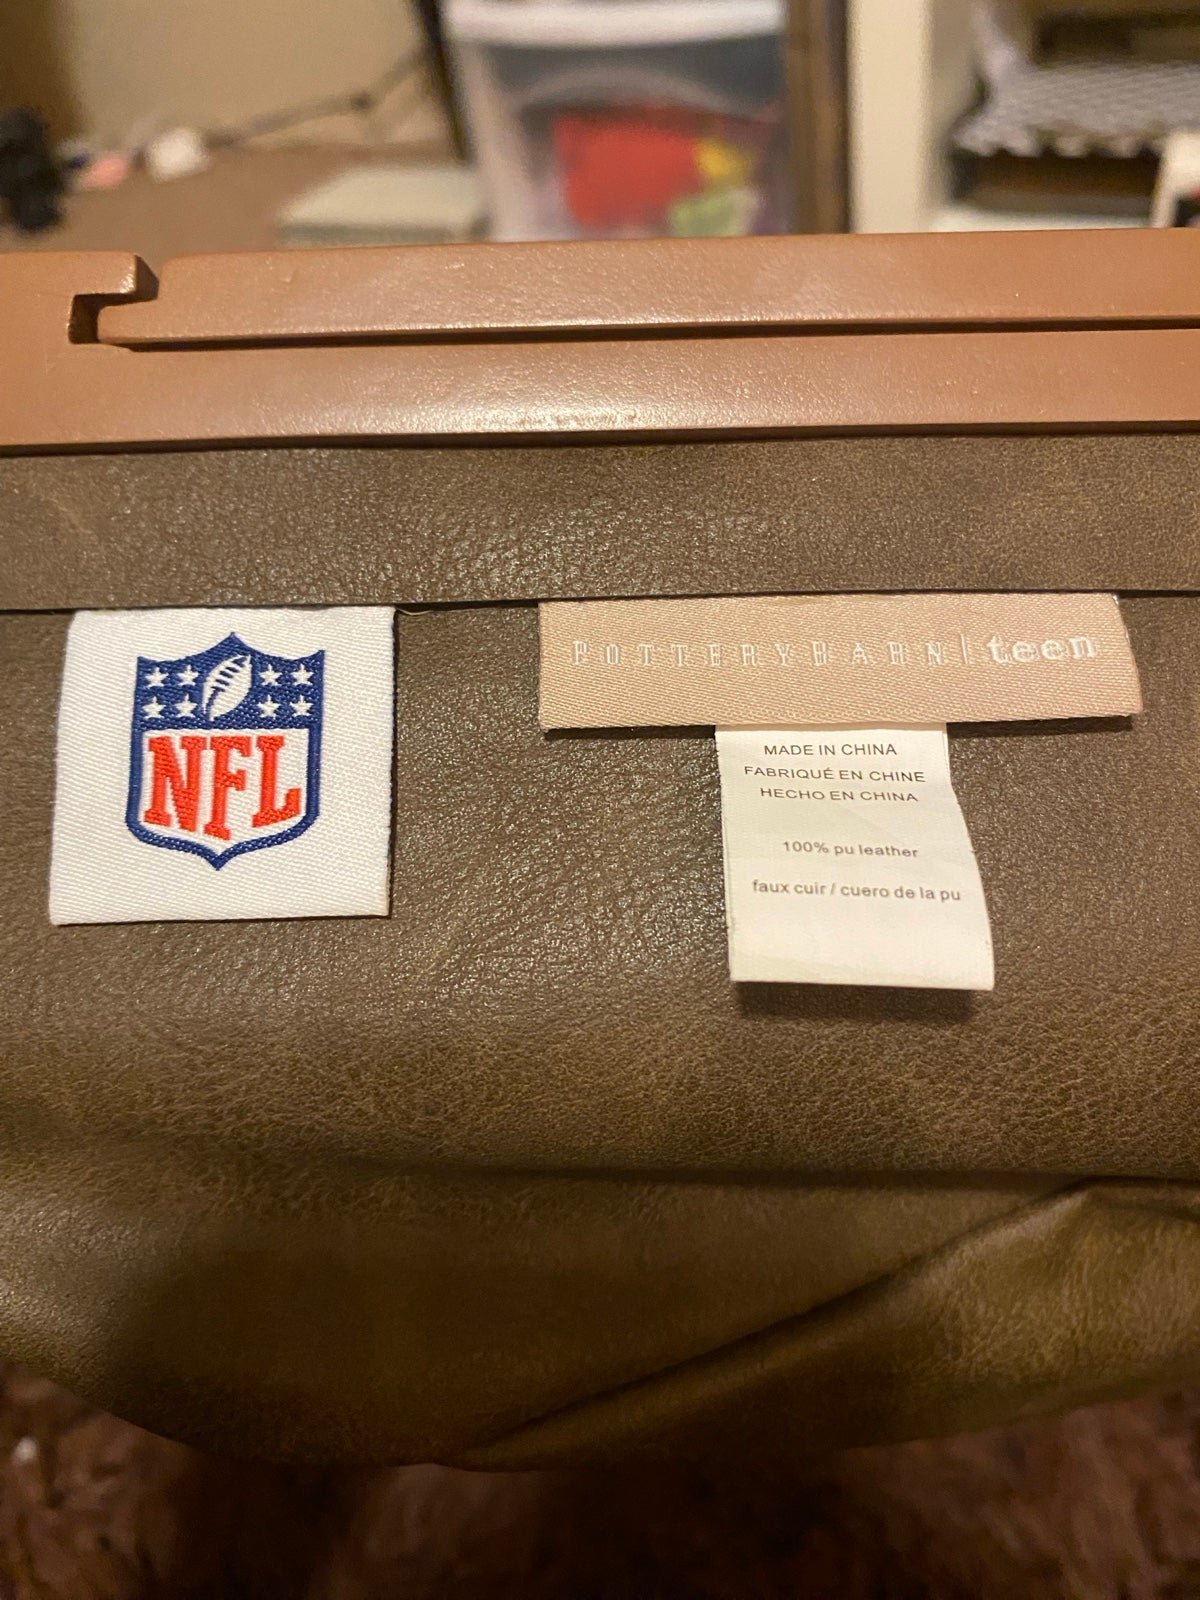 Pottery Barn Wooden Leather Teen NFL Jets Football Super Storage Lapdesk fOfaQLC4z